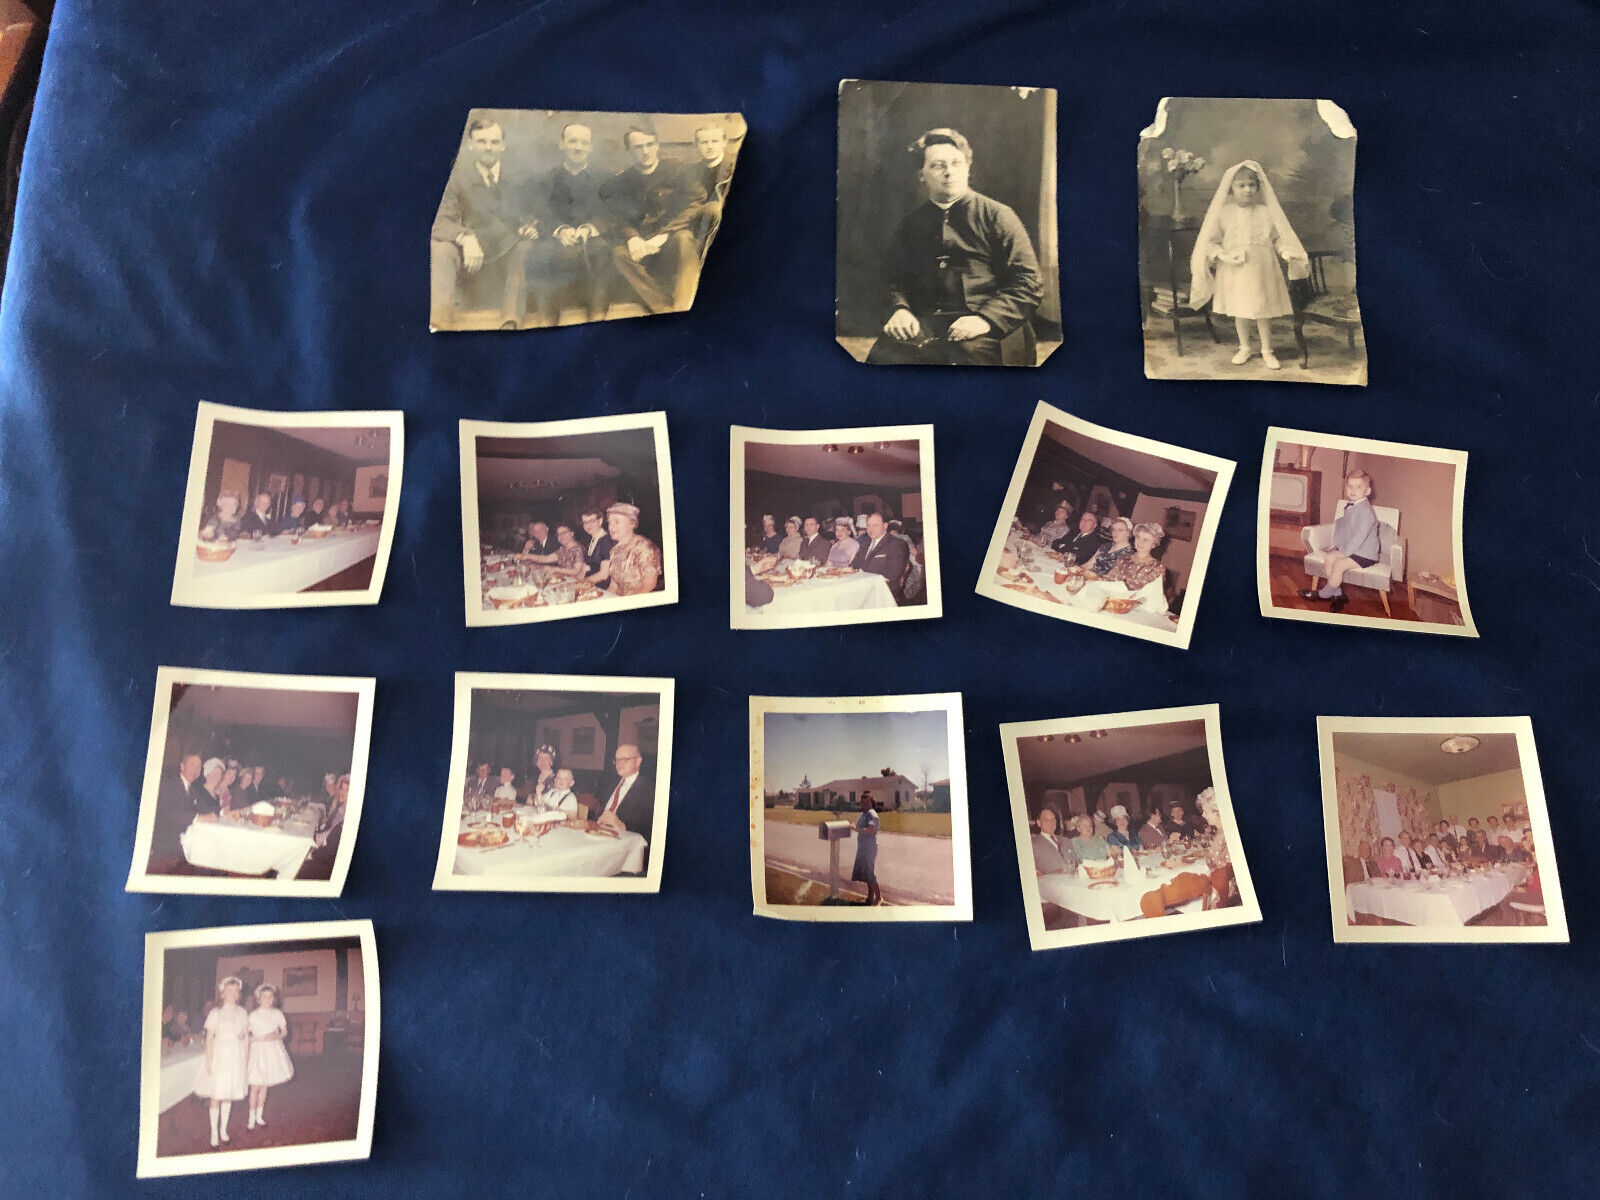 Vintage Black & White Photograph w/ Color Photos Too, see pics